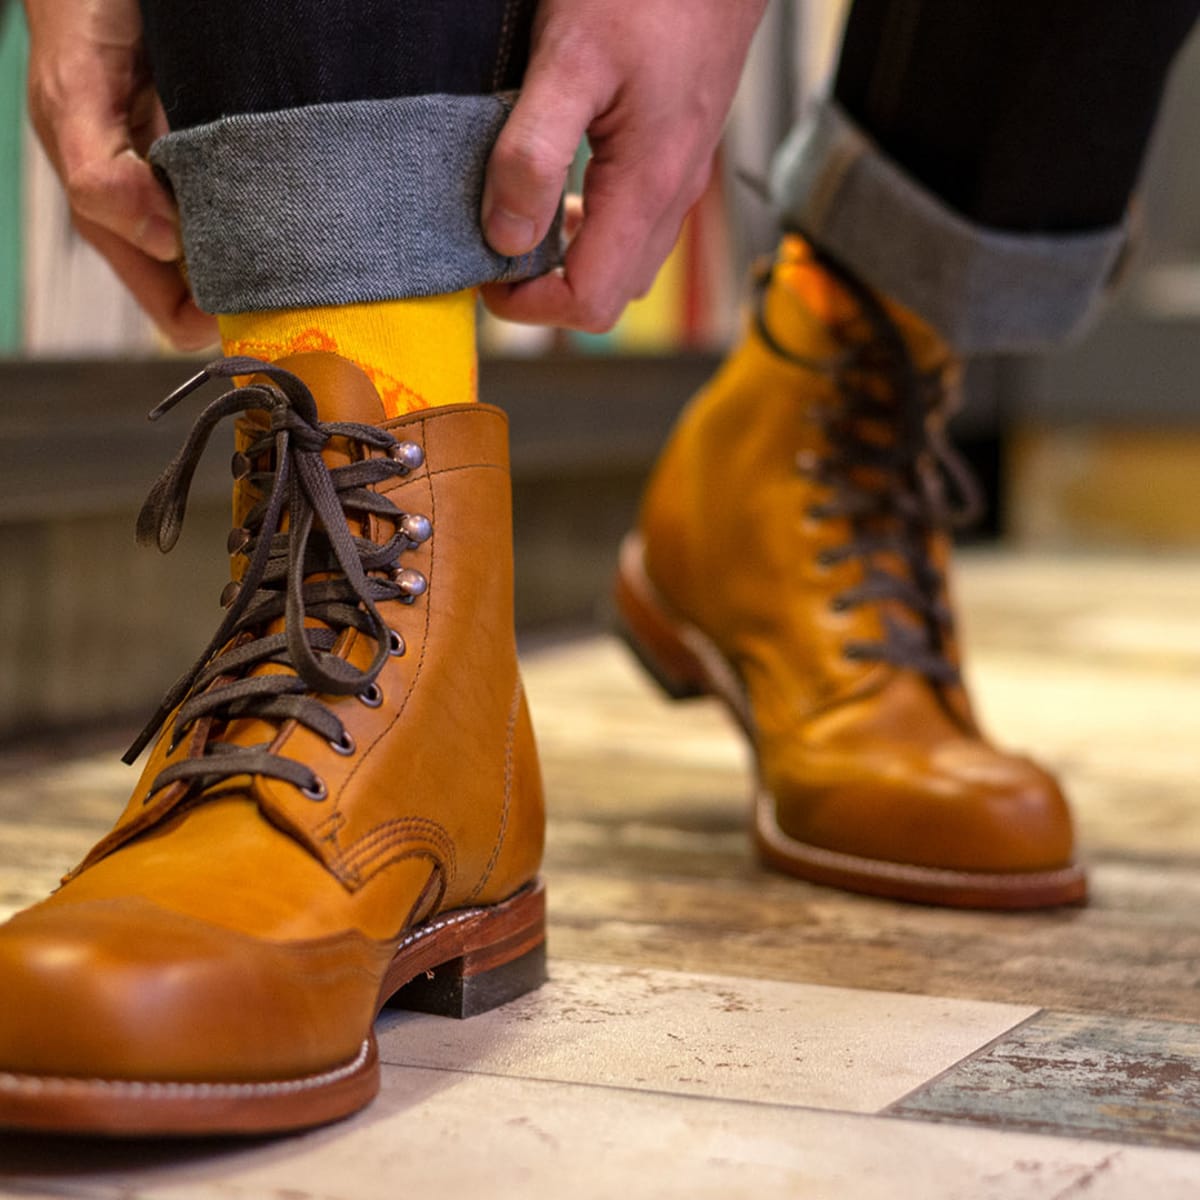 The Best Way to Stretch Leather Boots by HELM Boots